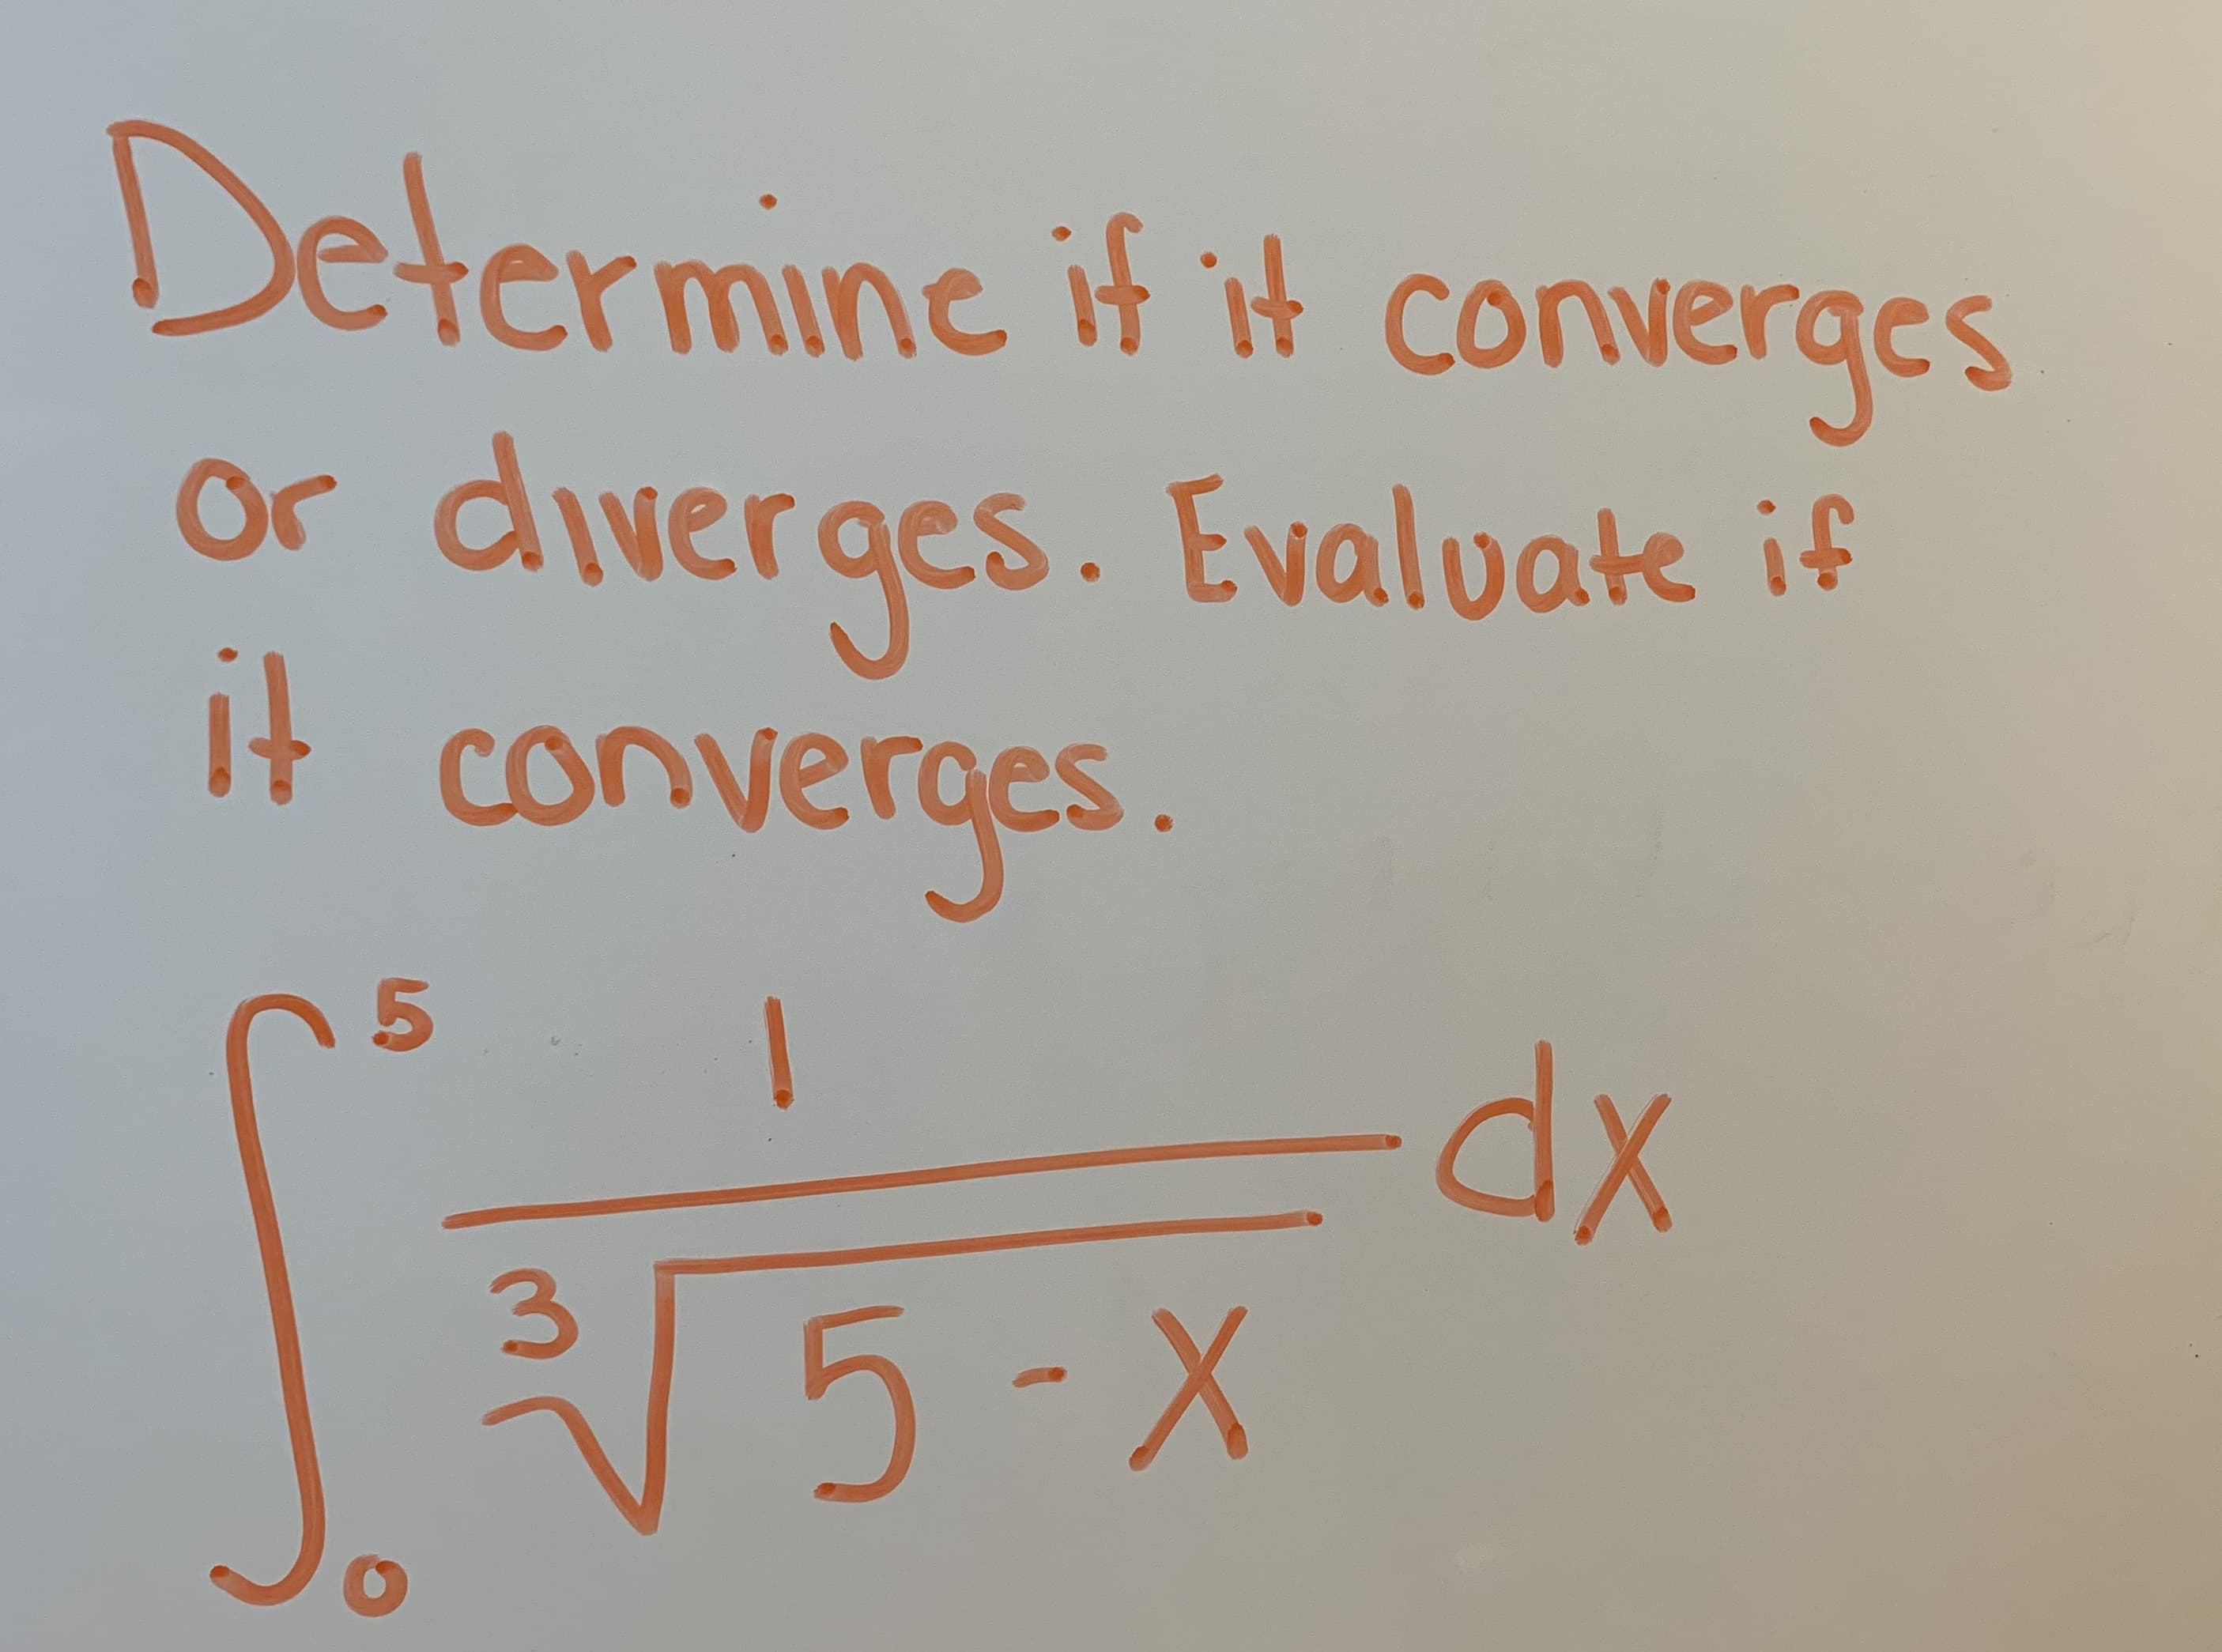 Determine if H conver
or diverges. Evaluate i
it
ges
converges
dx
3
